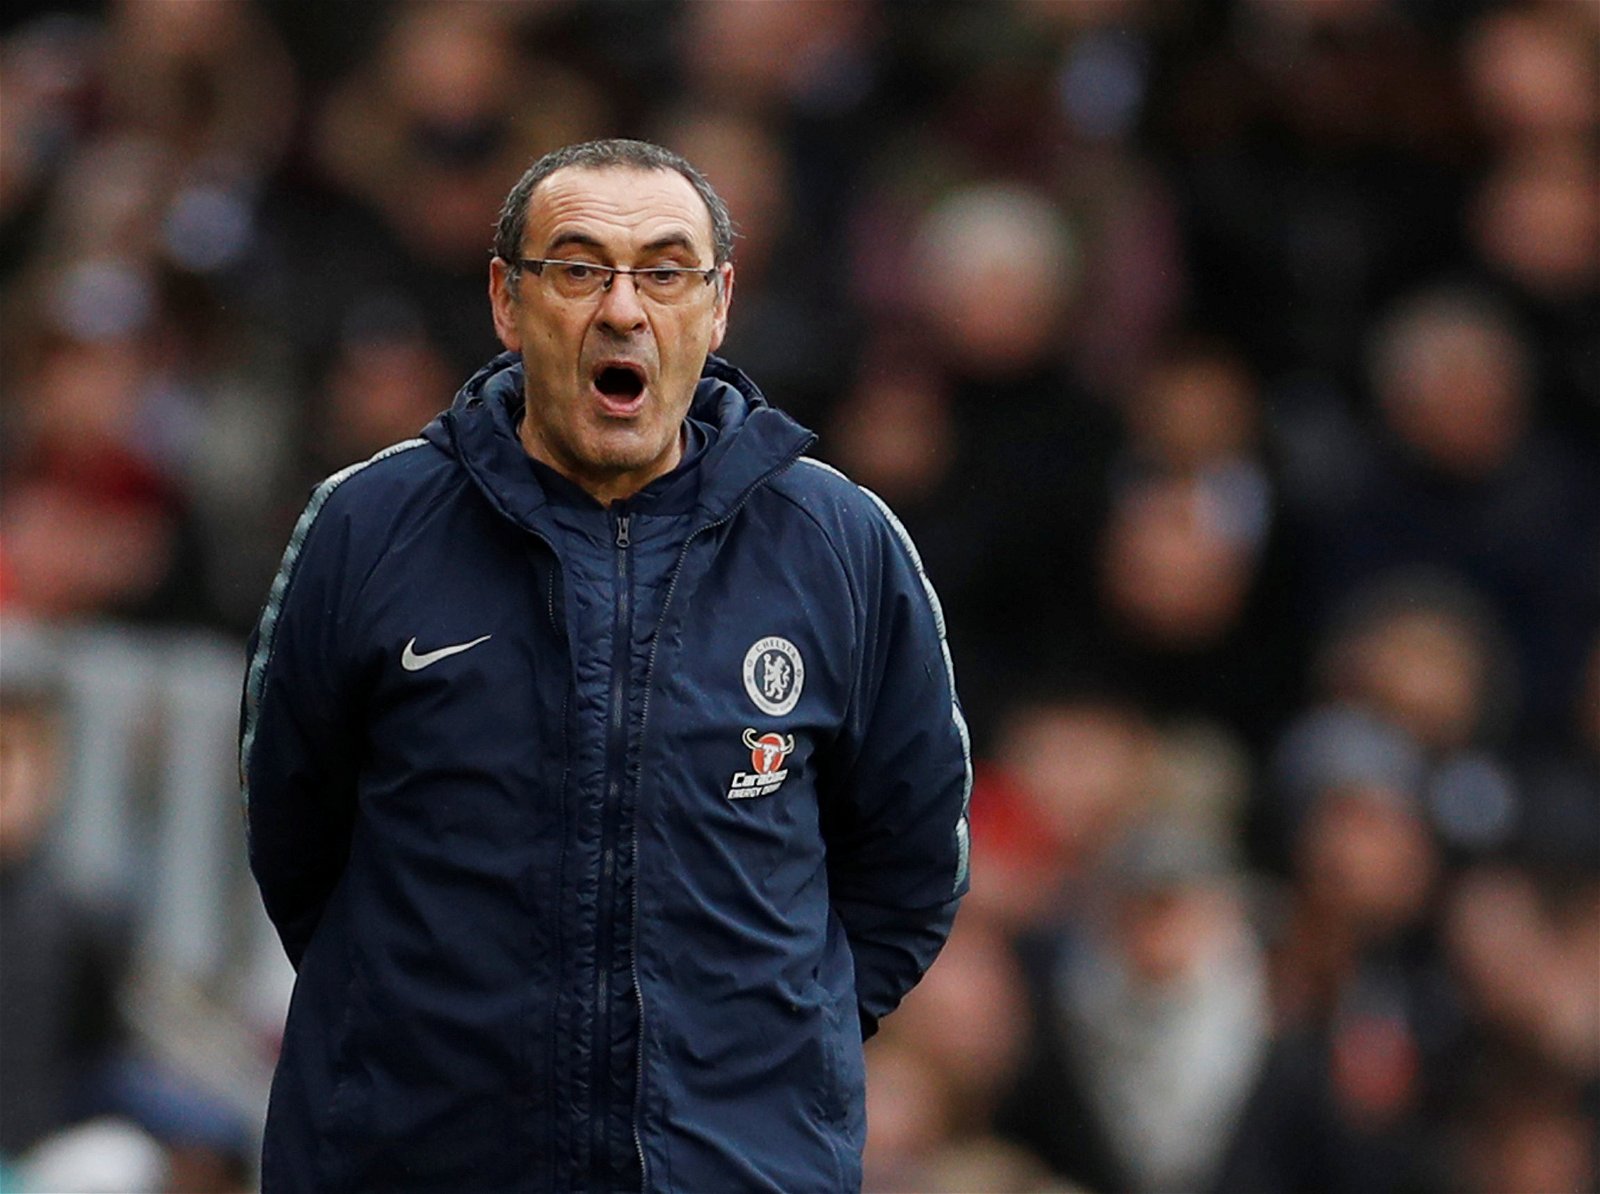 Sarri says where he wants Chelsea to finish in the Premier League